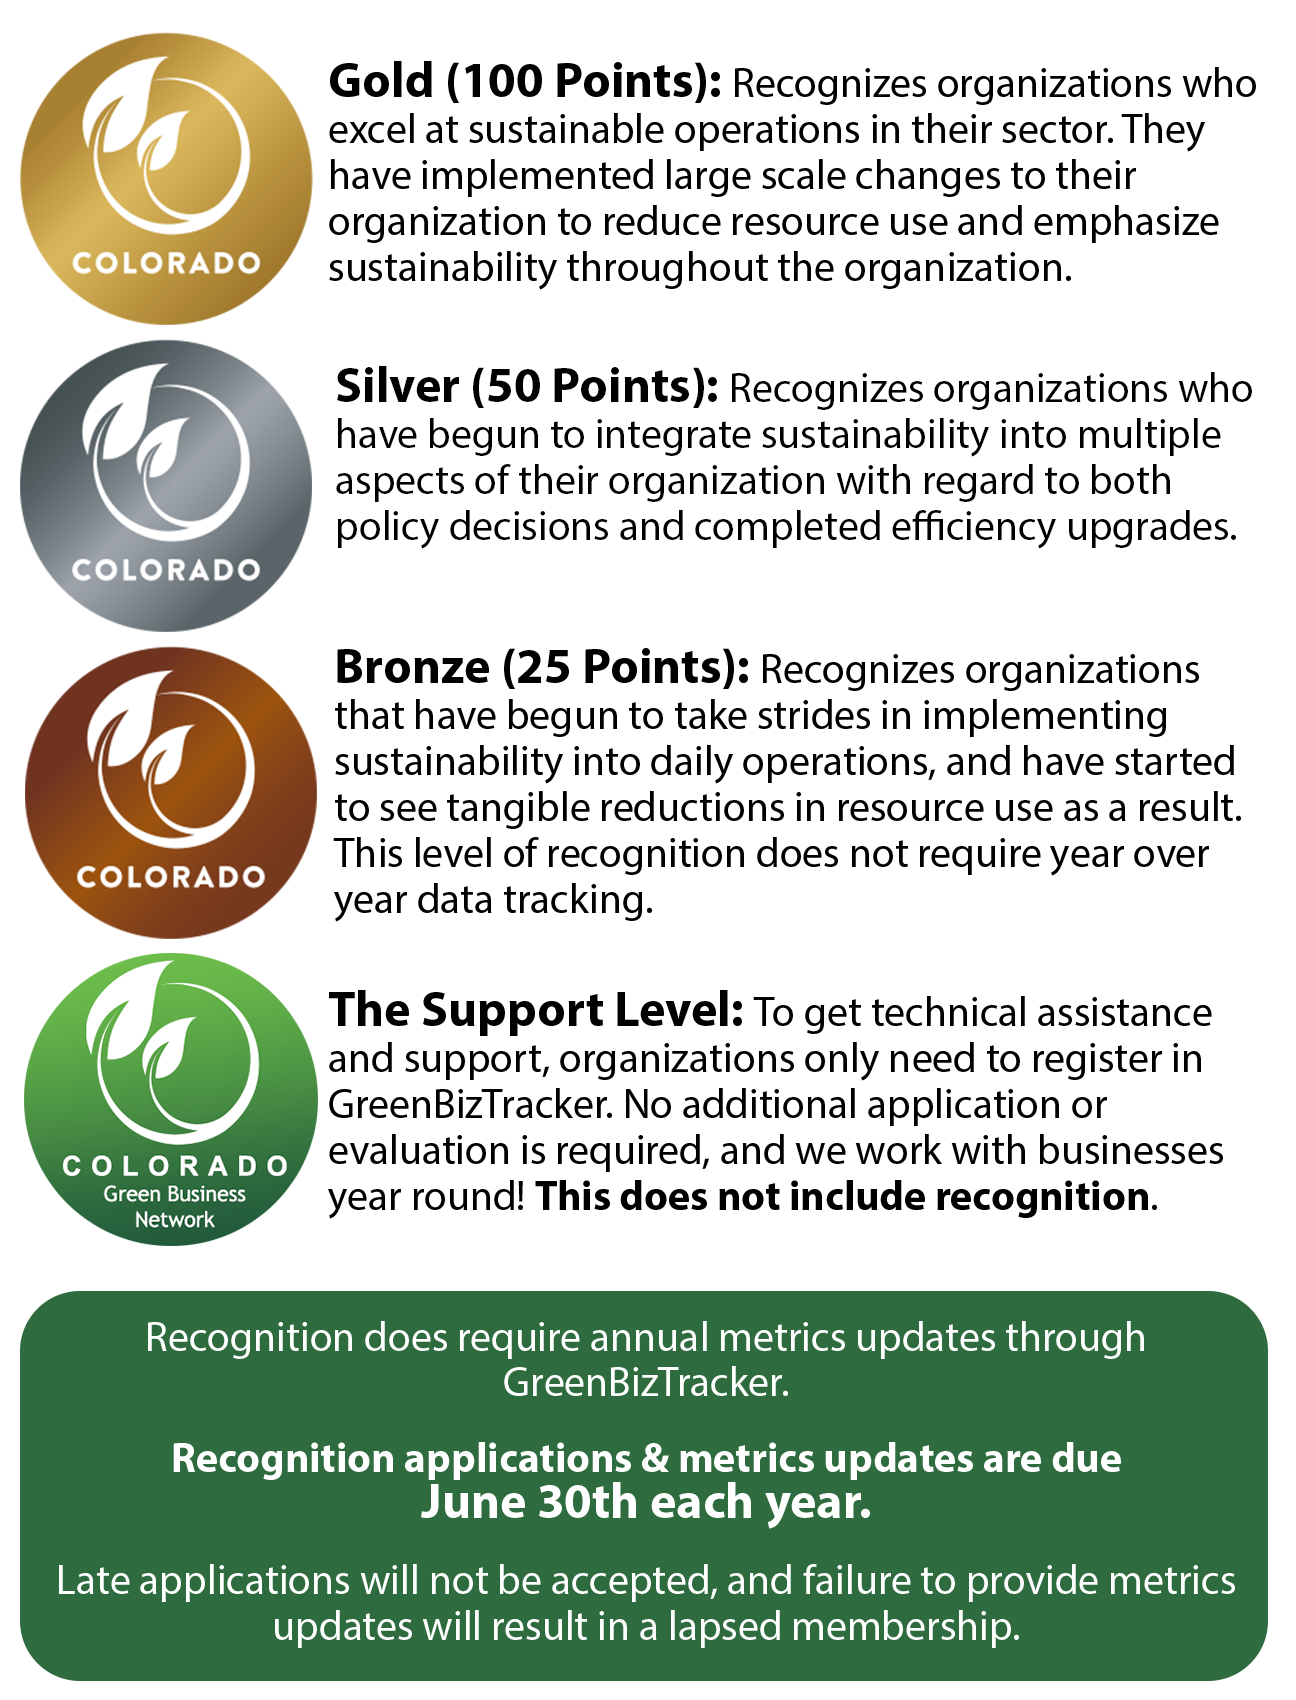 gold (100 points): recognizes organizations who excel at sustainable operations in their sector. They have implemented large scale changes to their organization to reduce resource use and emphasize sustainability throughout the organization. Silver (50 points): recognizes organizations who have begun to integrate sustainability into multiple aspects of their organization with regard to both policy decision and completed efficiency upgrades. Bronze (25 points): recognizes organizations that have begun to take strides in implementing sustainability into daily operations, and have started to see tangible reductions in resource use as a result. This level of recognition does not require year over year data tracking. The support level: to get technical assistance and support, organizations only need to register in GreenBizTracker. No additional application or evaluation is required, and we work with businesses year round. This does not include recognition. Recognition does require annual metrics updates through GreenBizTracker. Recognition applications and metrics updates are due June 30th each year. Late applications will not be accepted, and failure to provide metrics updates will result in a lapsed membership.